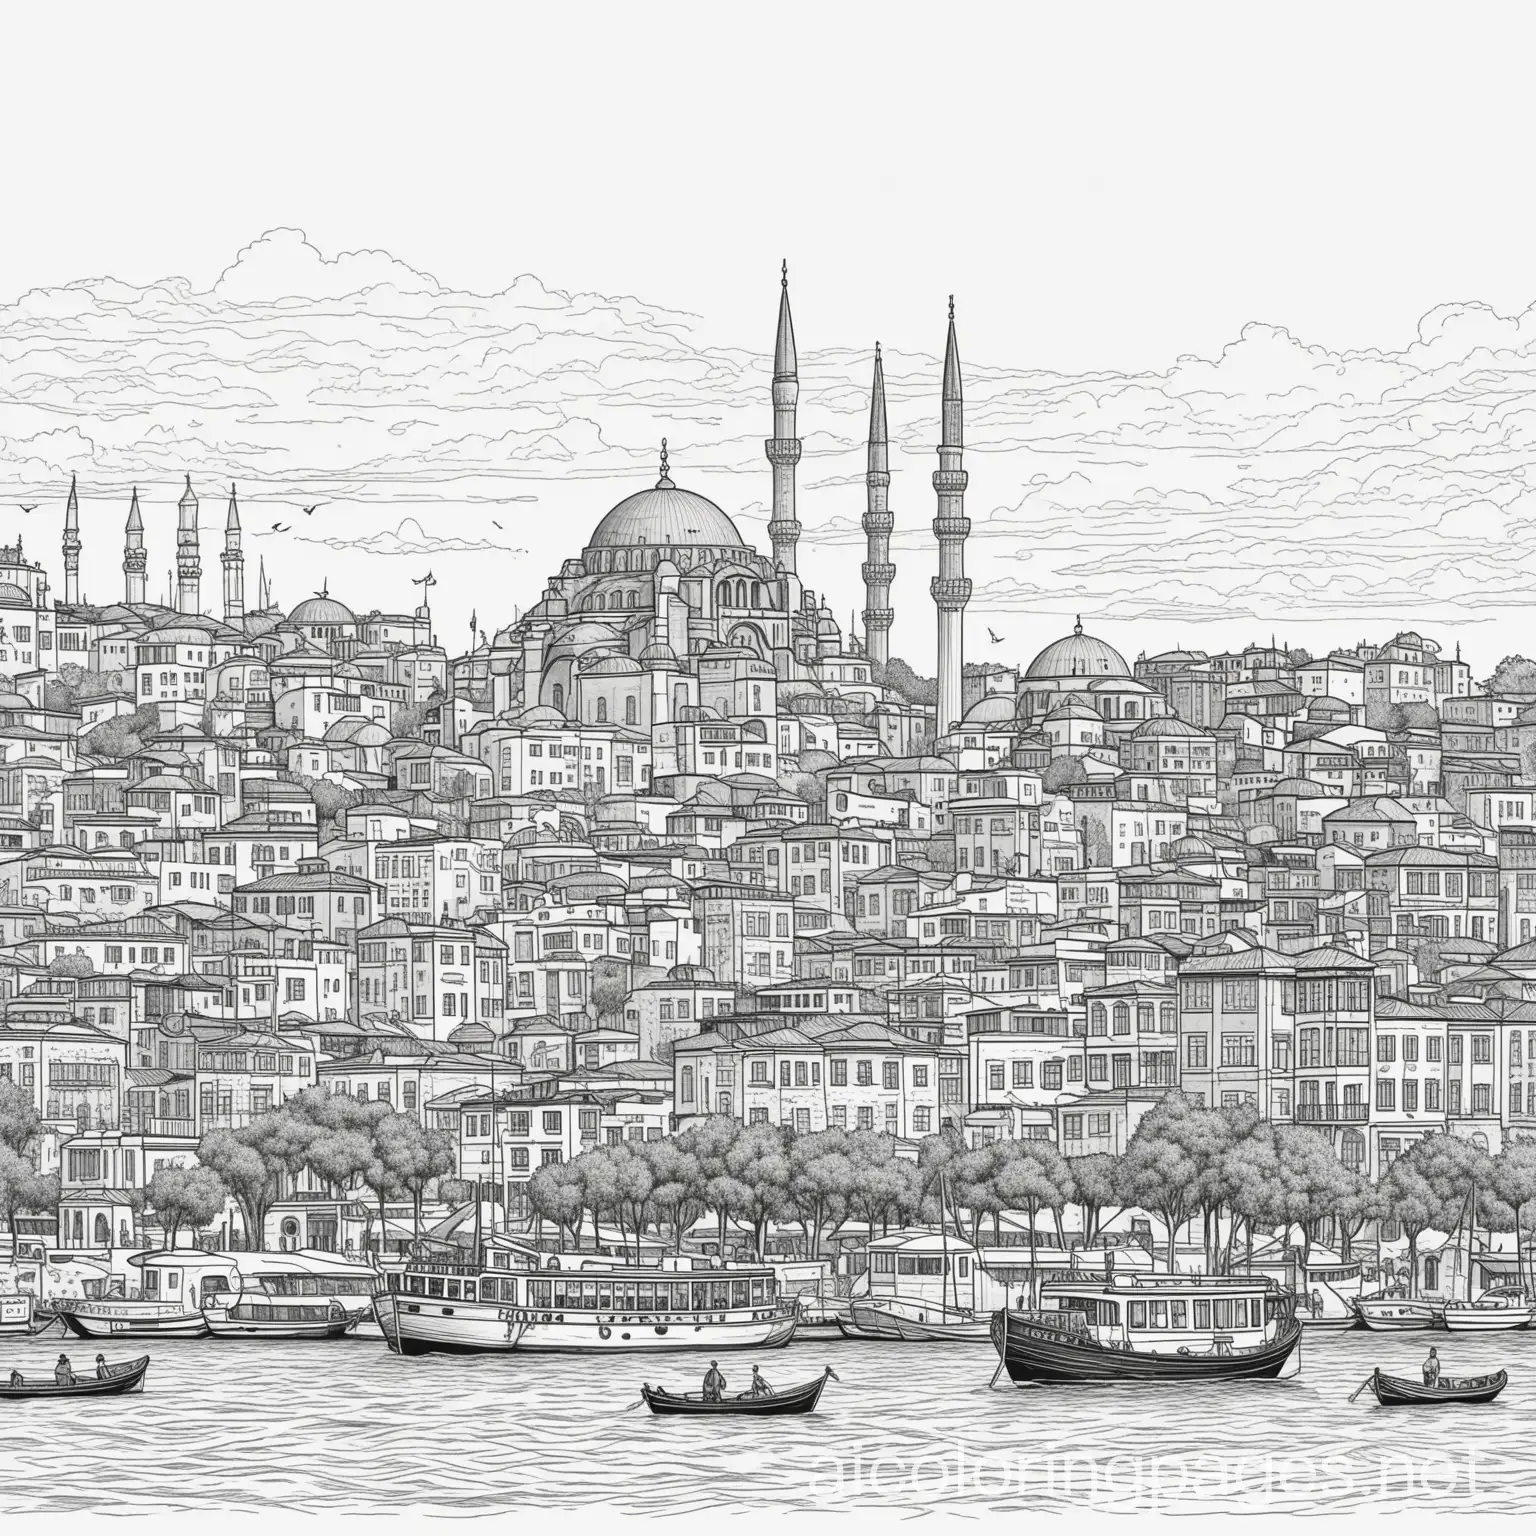 istanbul, Coloring Page, black and white, line art, white background, Simplicity, Ample White Space. The background of the coloring page is plain white to make it easy for young children to color within the lines. The outlines of all the subjects are easy to distinguish, making it simple for kids to color without too much difficulty